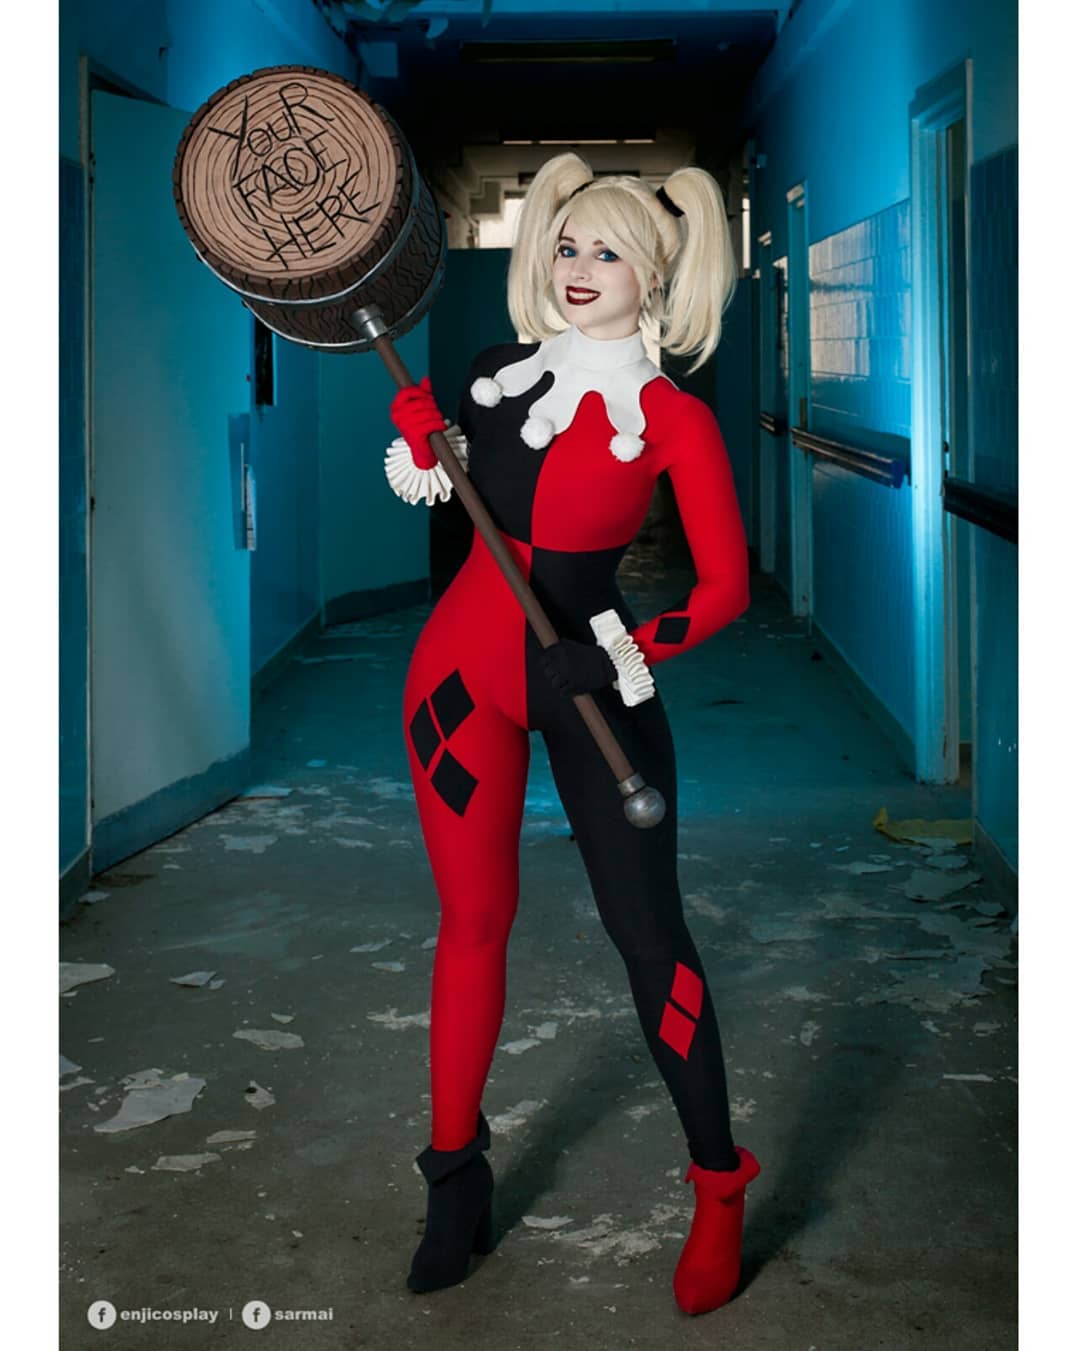 This Harley Quinn cosplay by Enji Night is crazy good